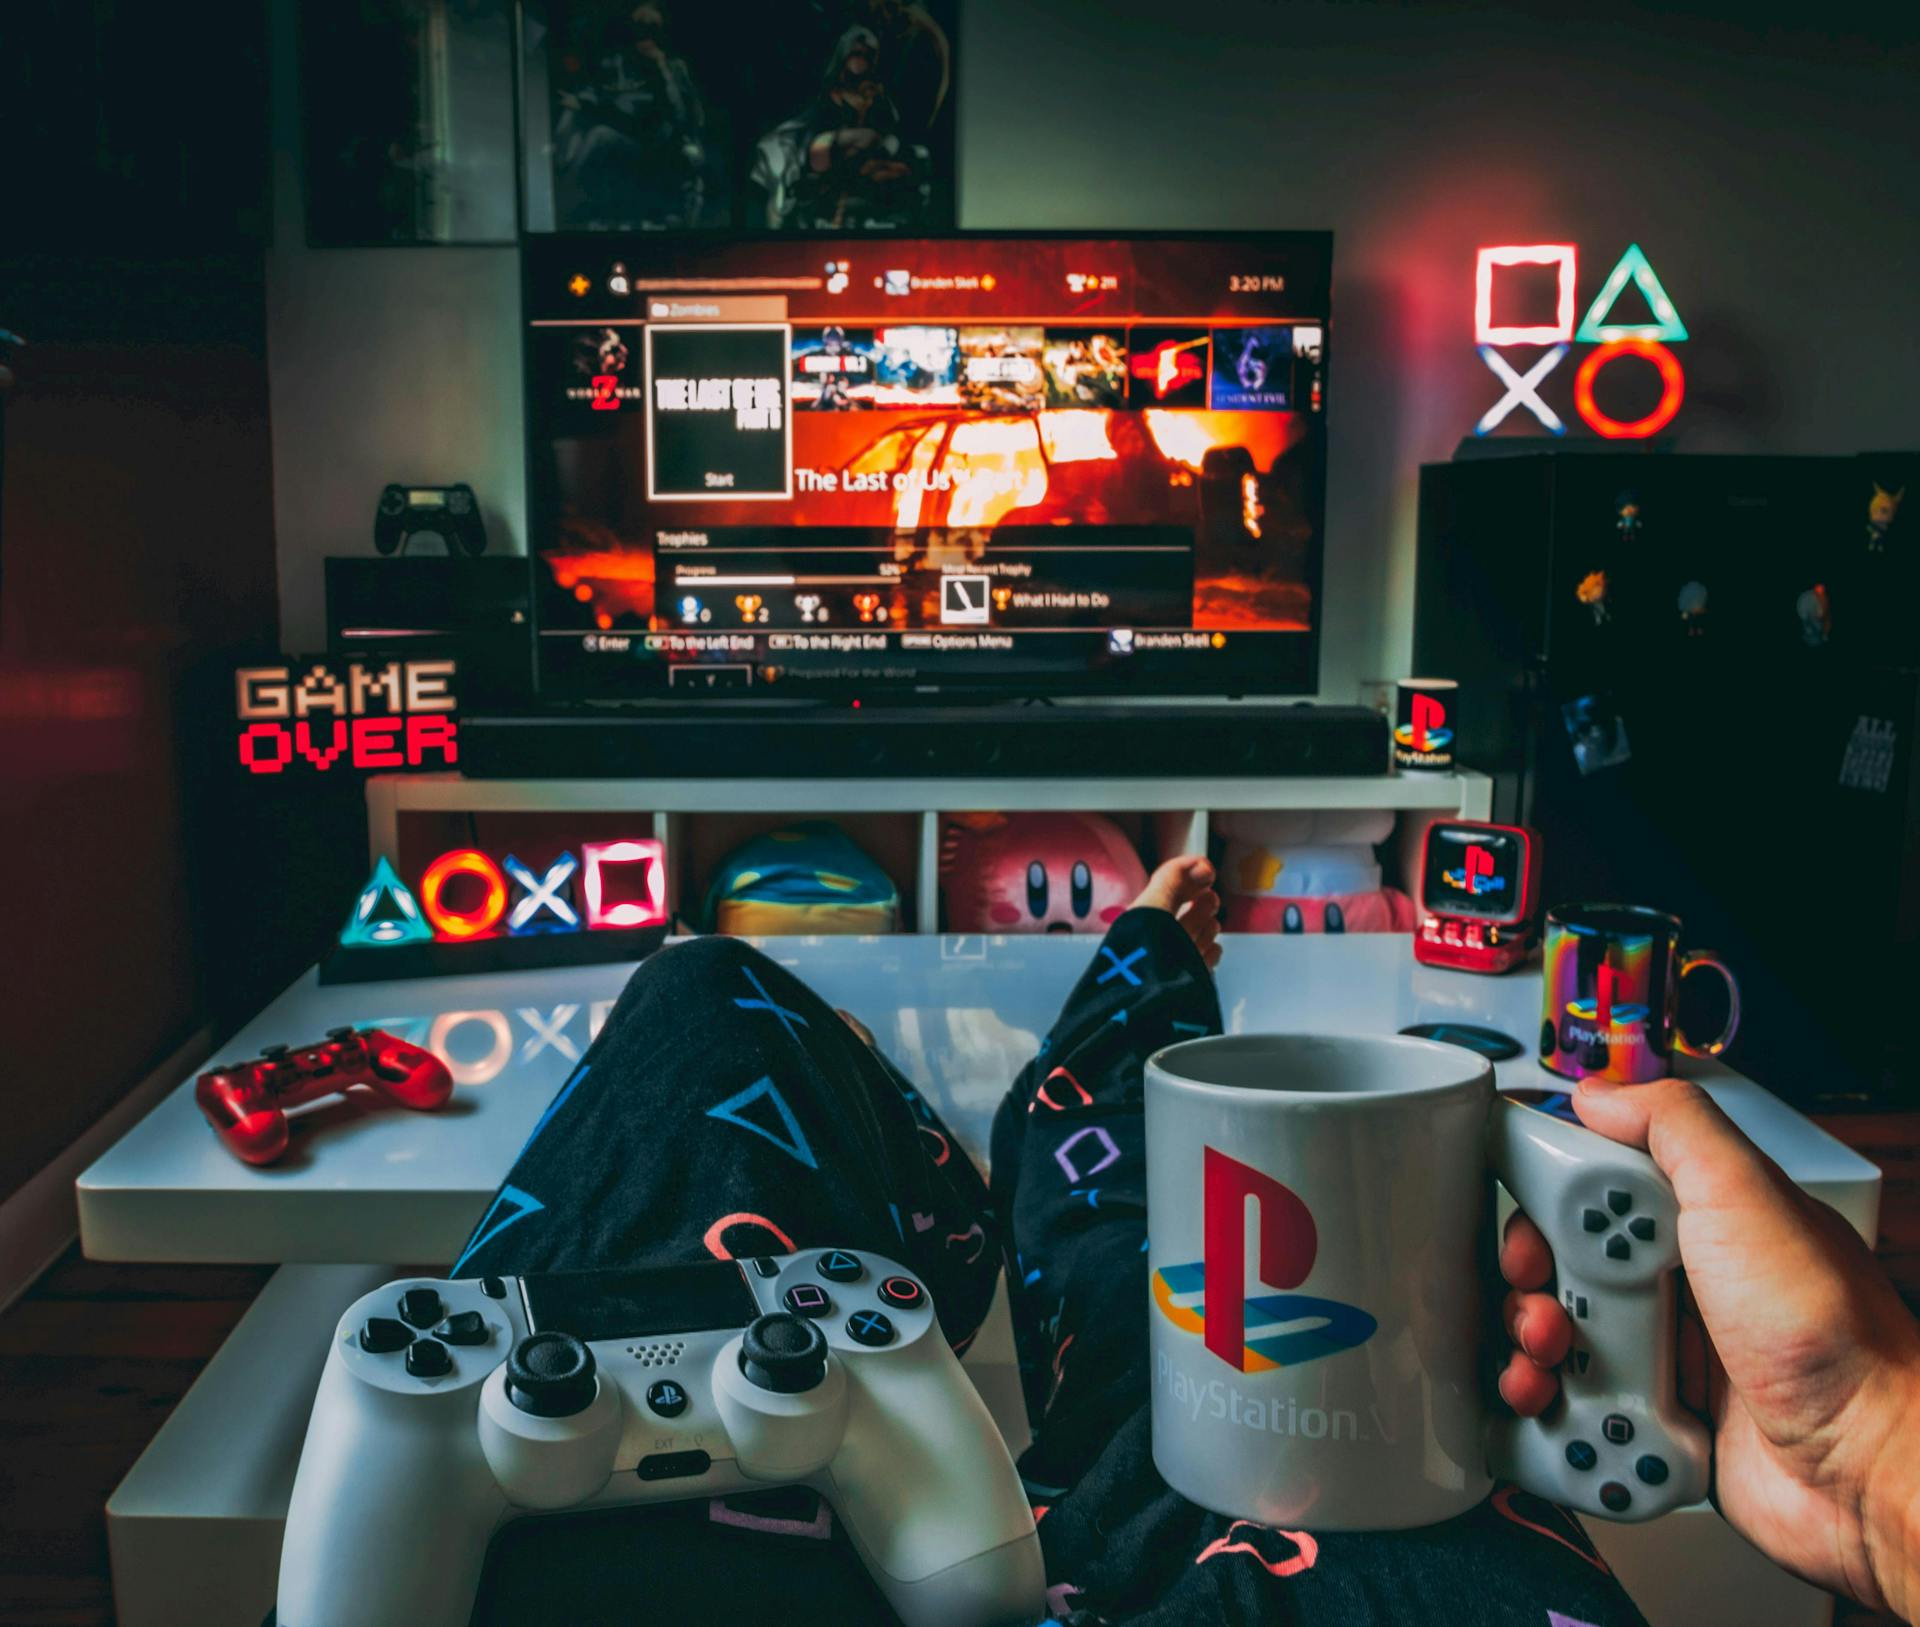 Brand ambassador playing playstation surrounded by playstation merchandise